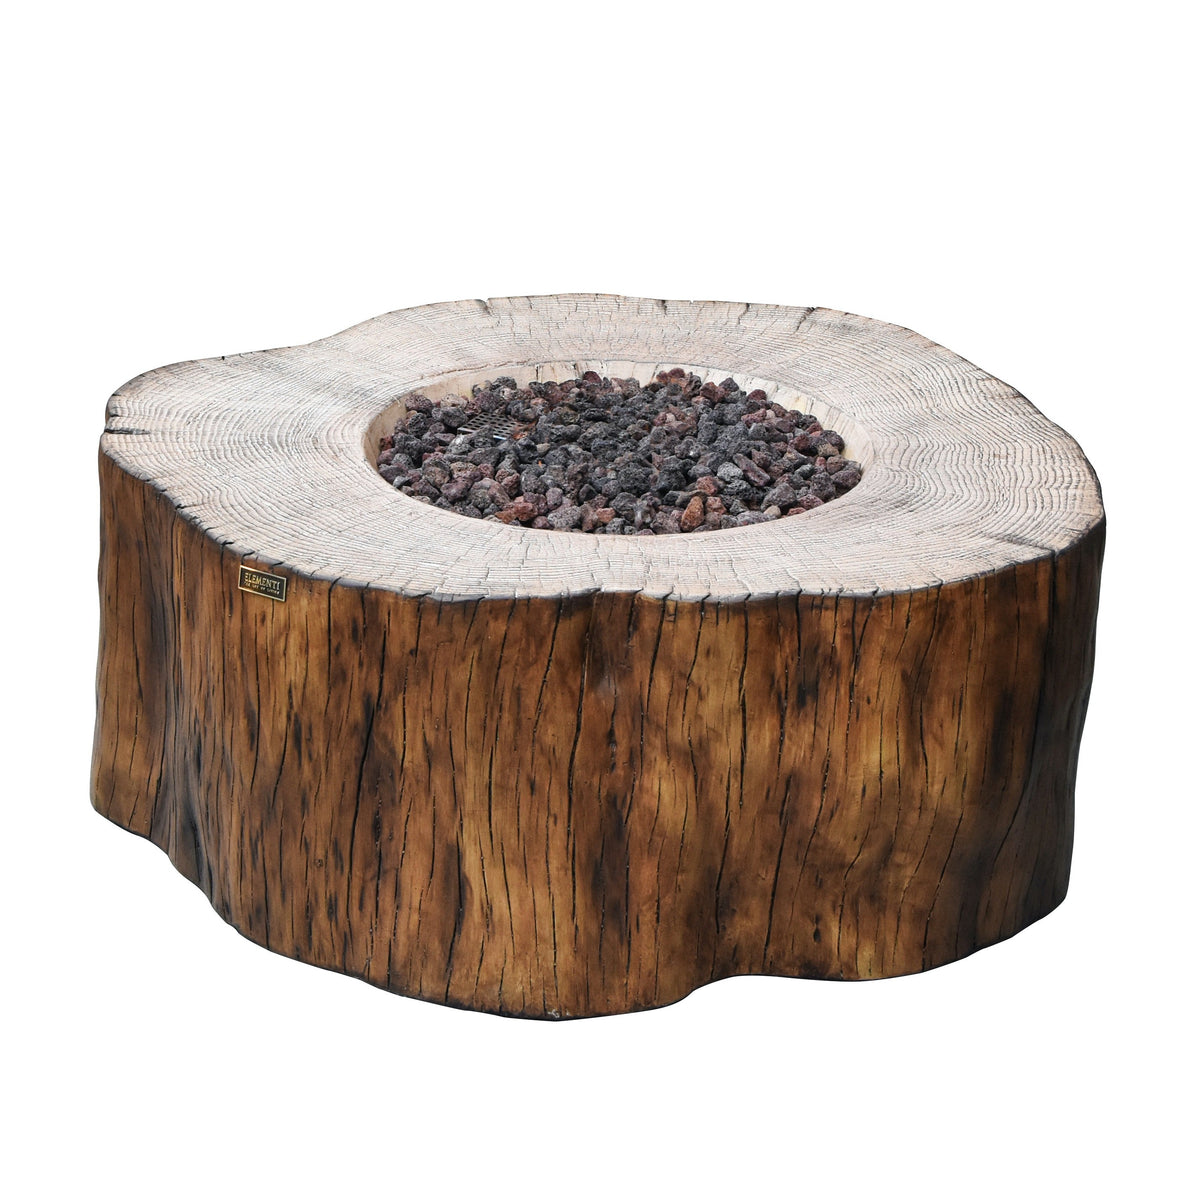 Elementi Manchester Fire Pit Table in Red Wood